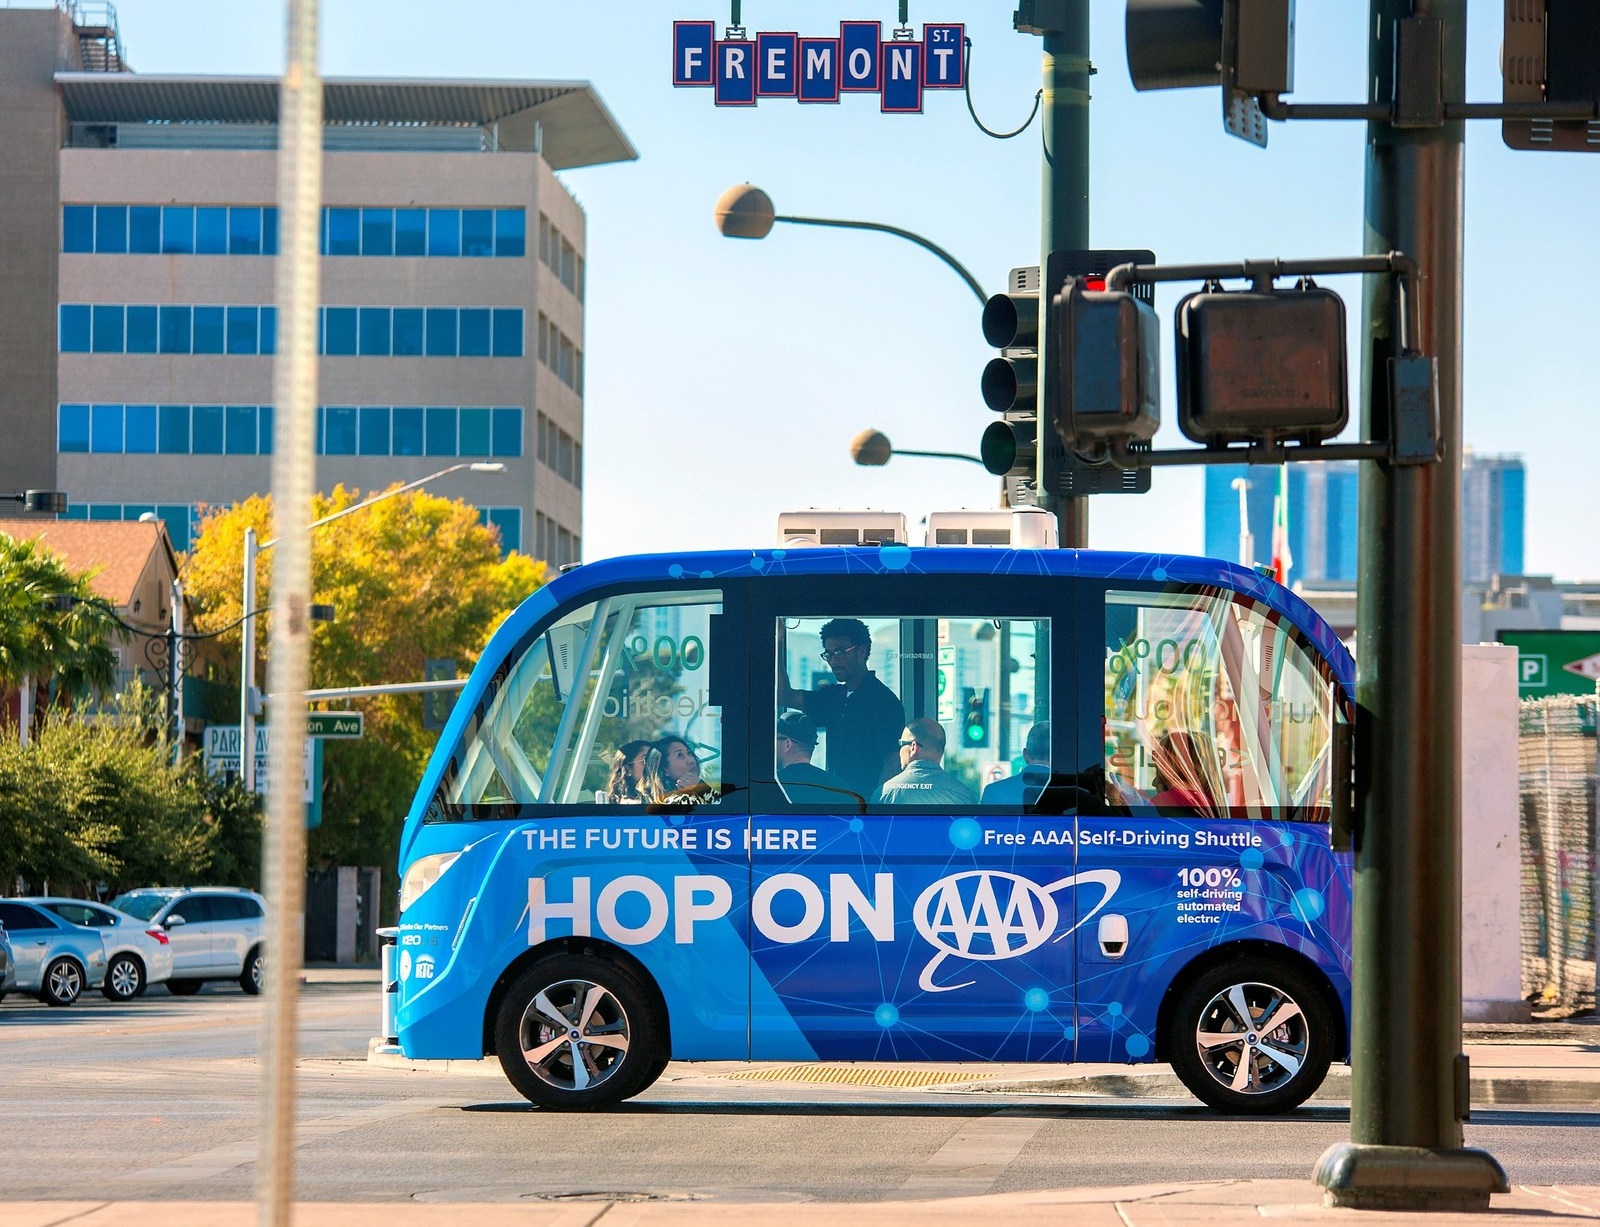 Driverless shuttle in Las Vegas gets in fender bender within an hour